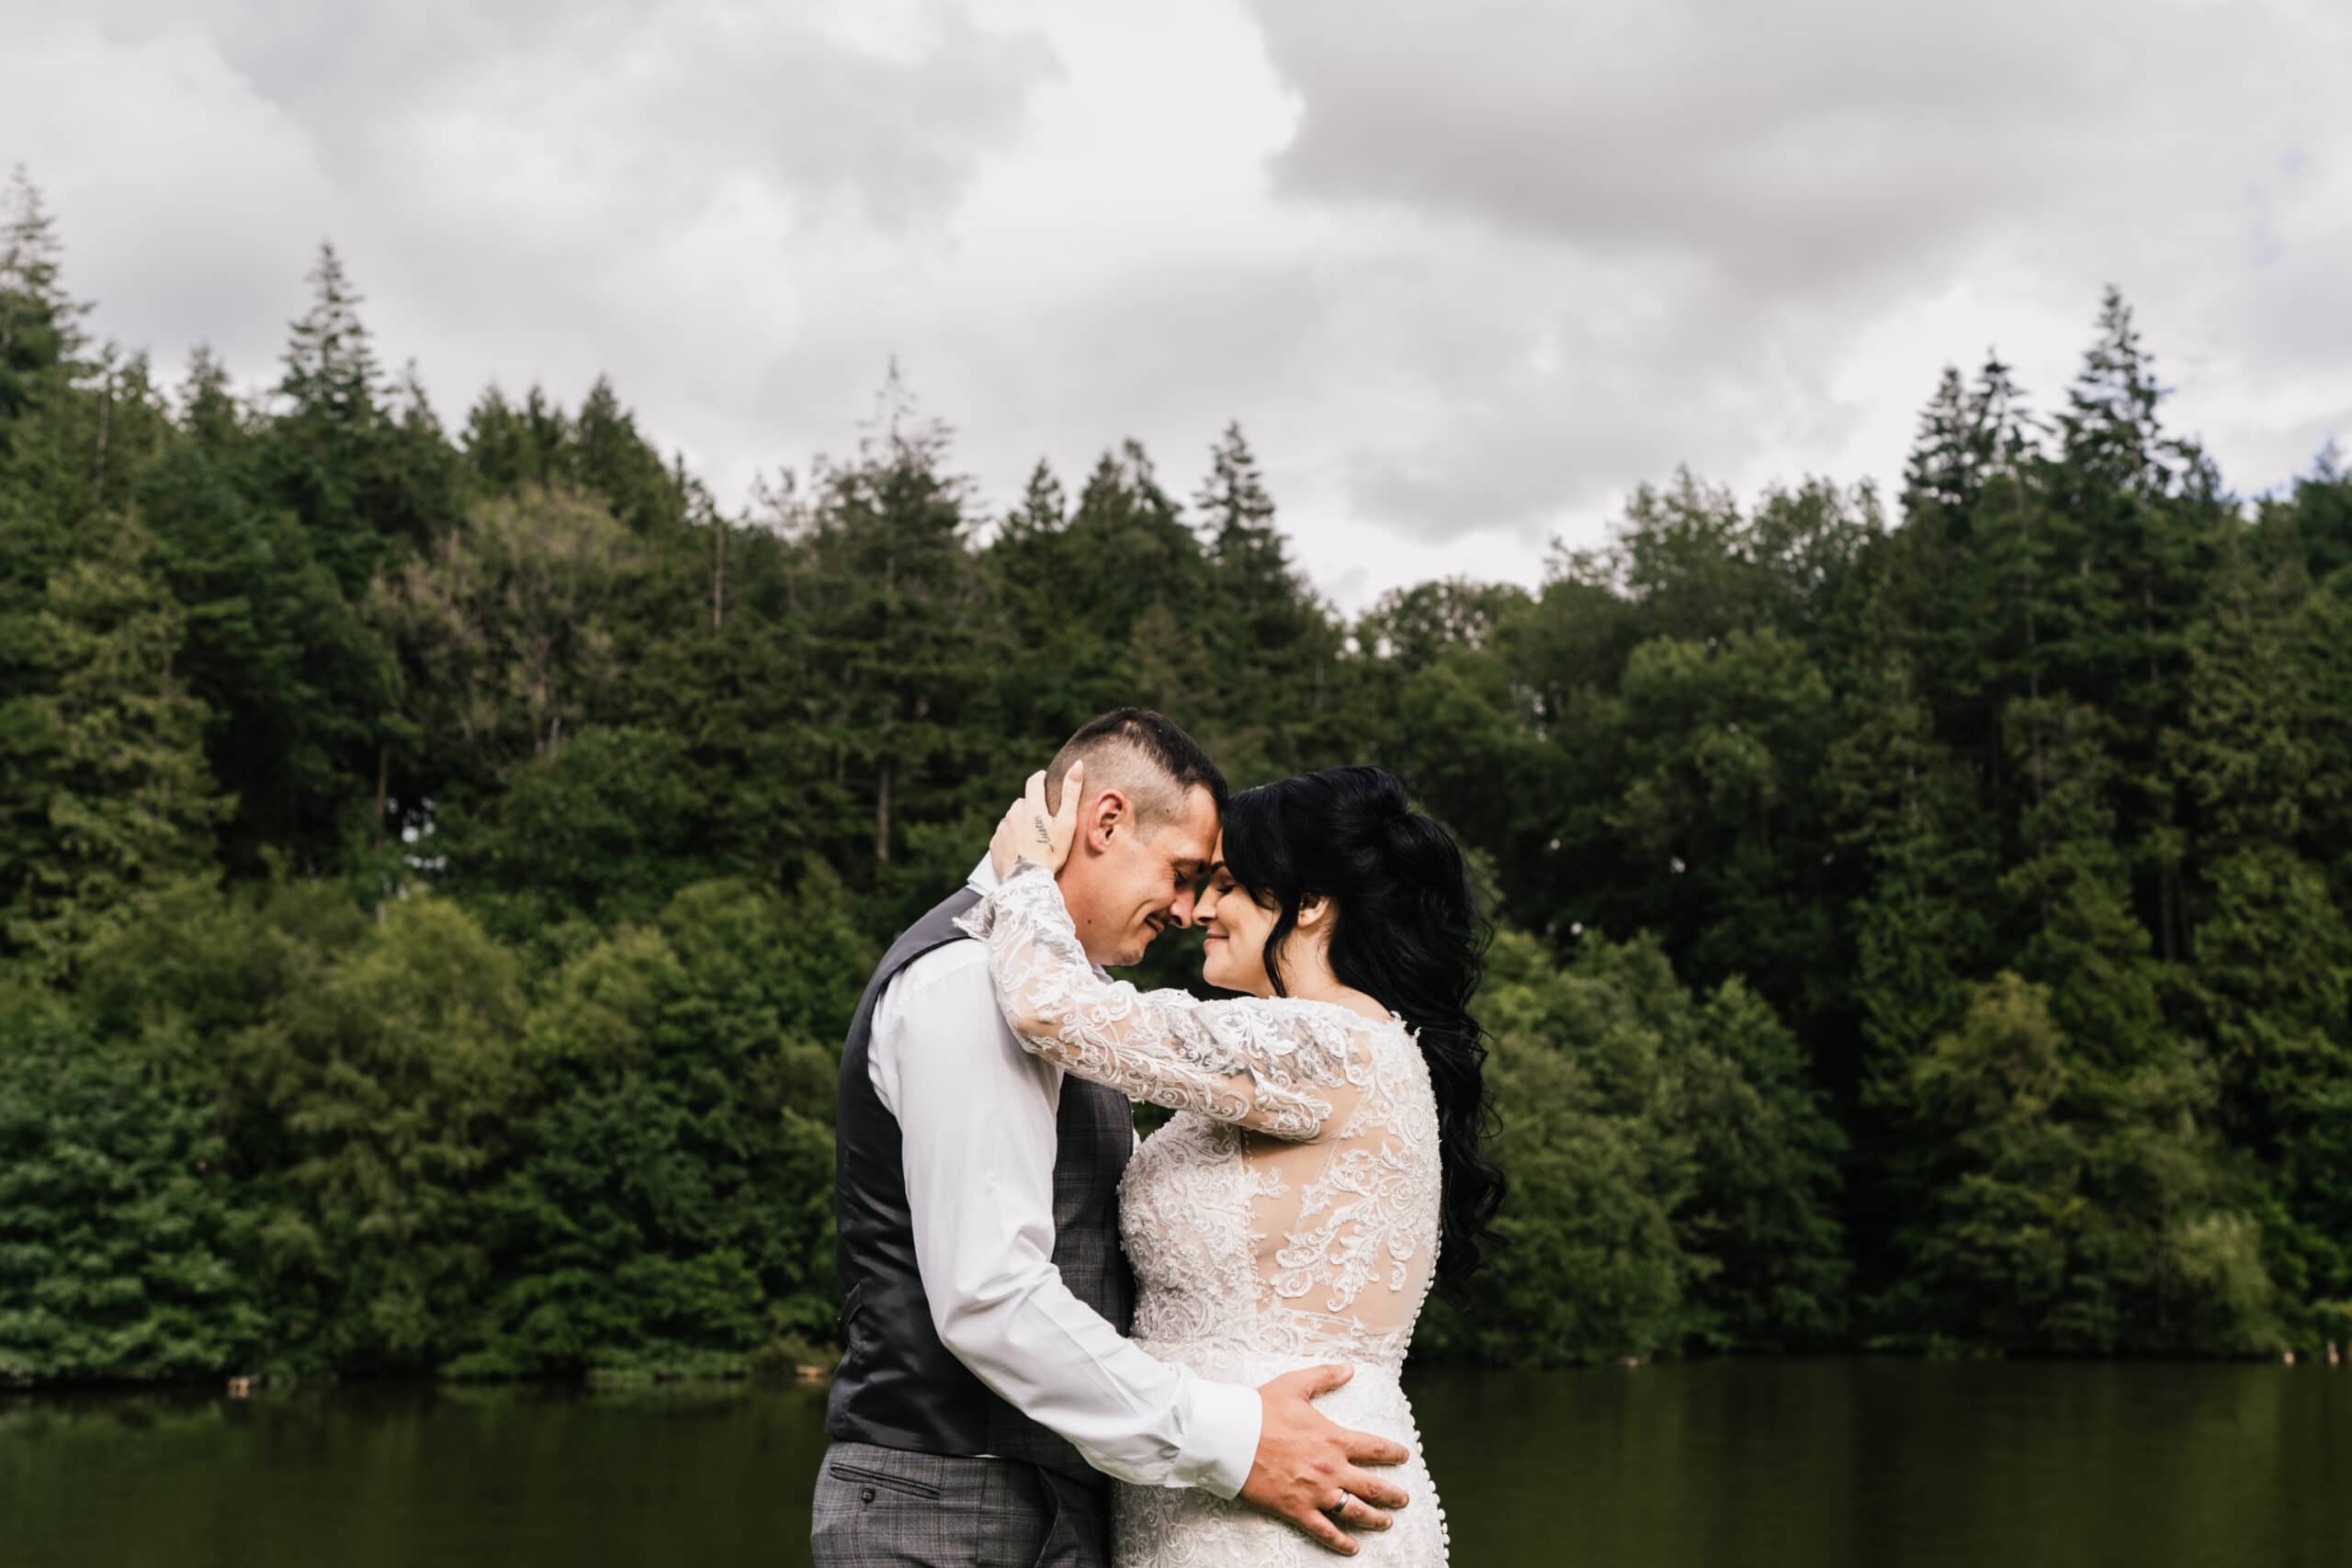 A couple embraces, foreheads touching, beside a serene lake at a Canada Lodge with a dense forest in the background under a cloudy sky. The woman wears a lace dress and the man is in a